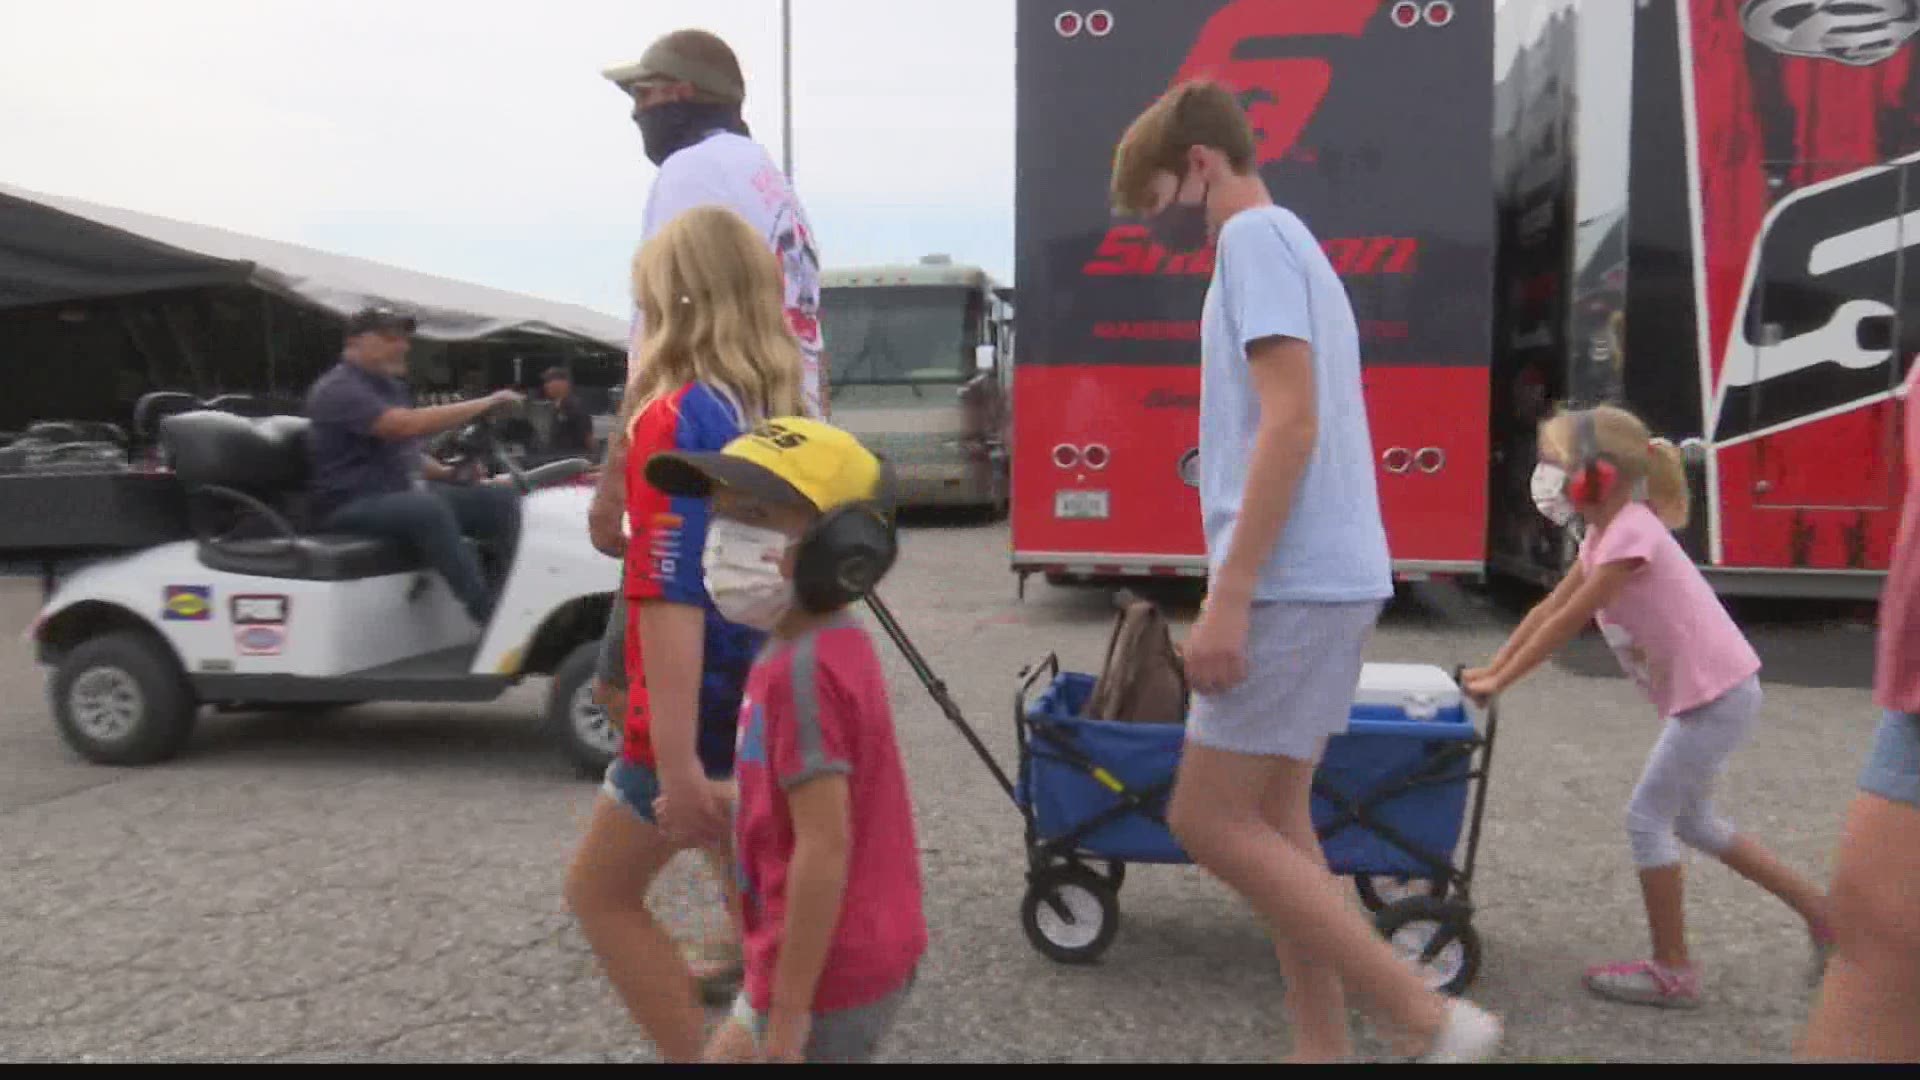 Labor Day brings thousands of drag racing fans to Lucas Oil Raceway.